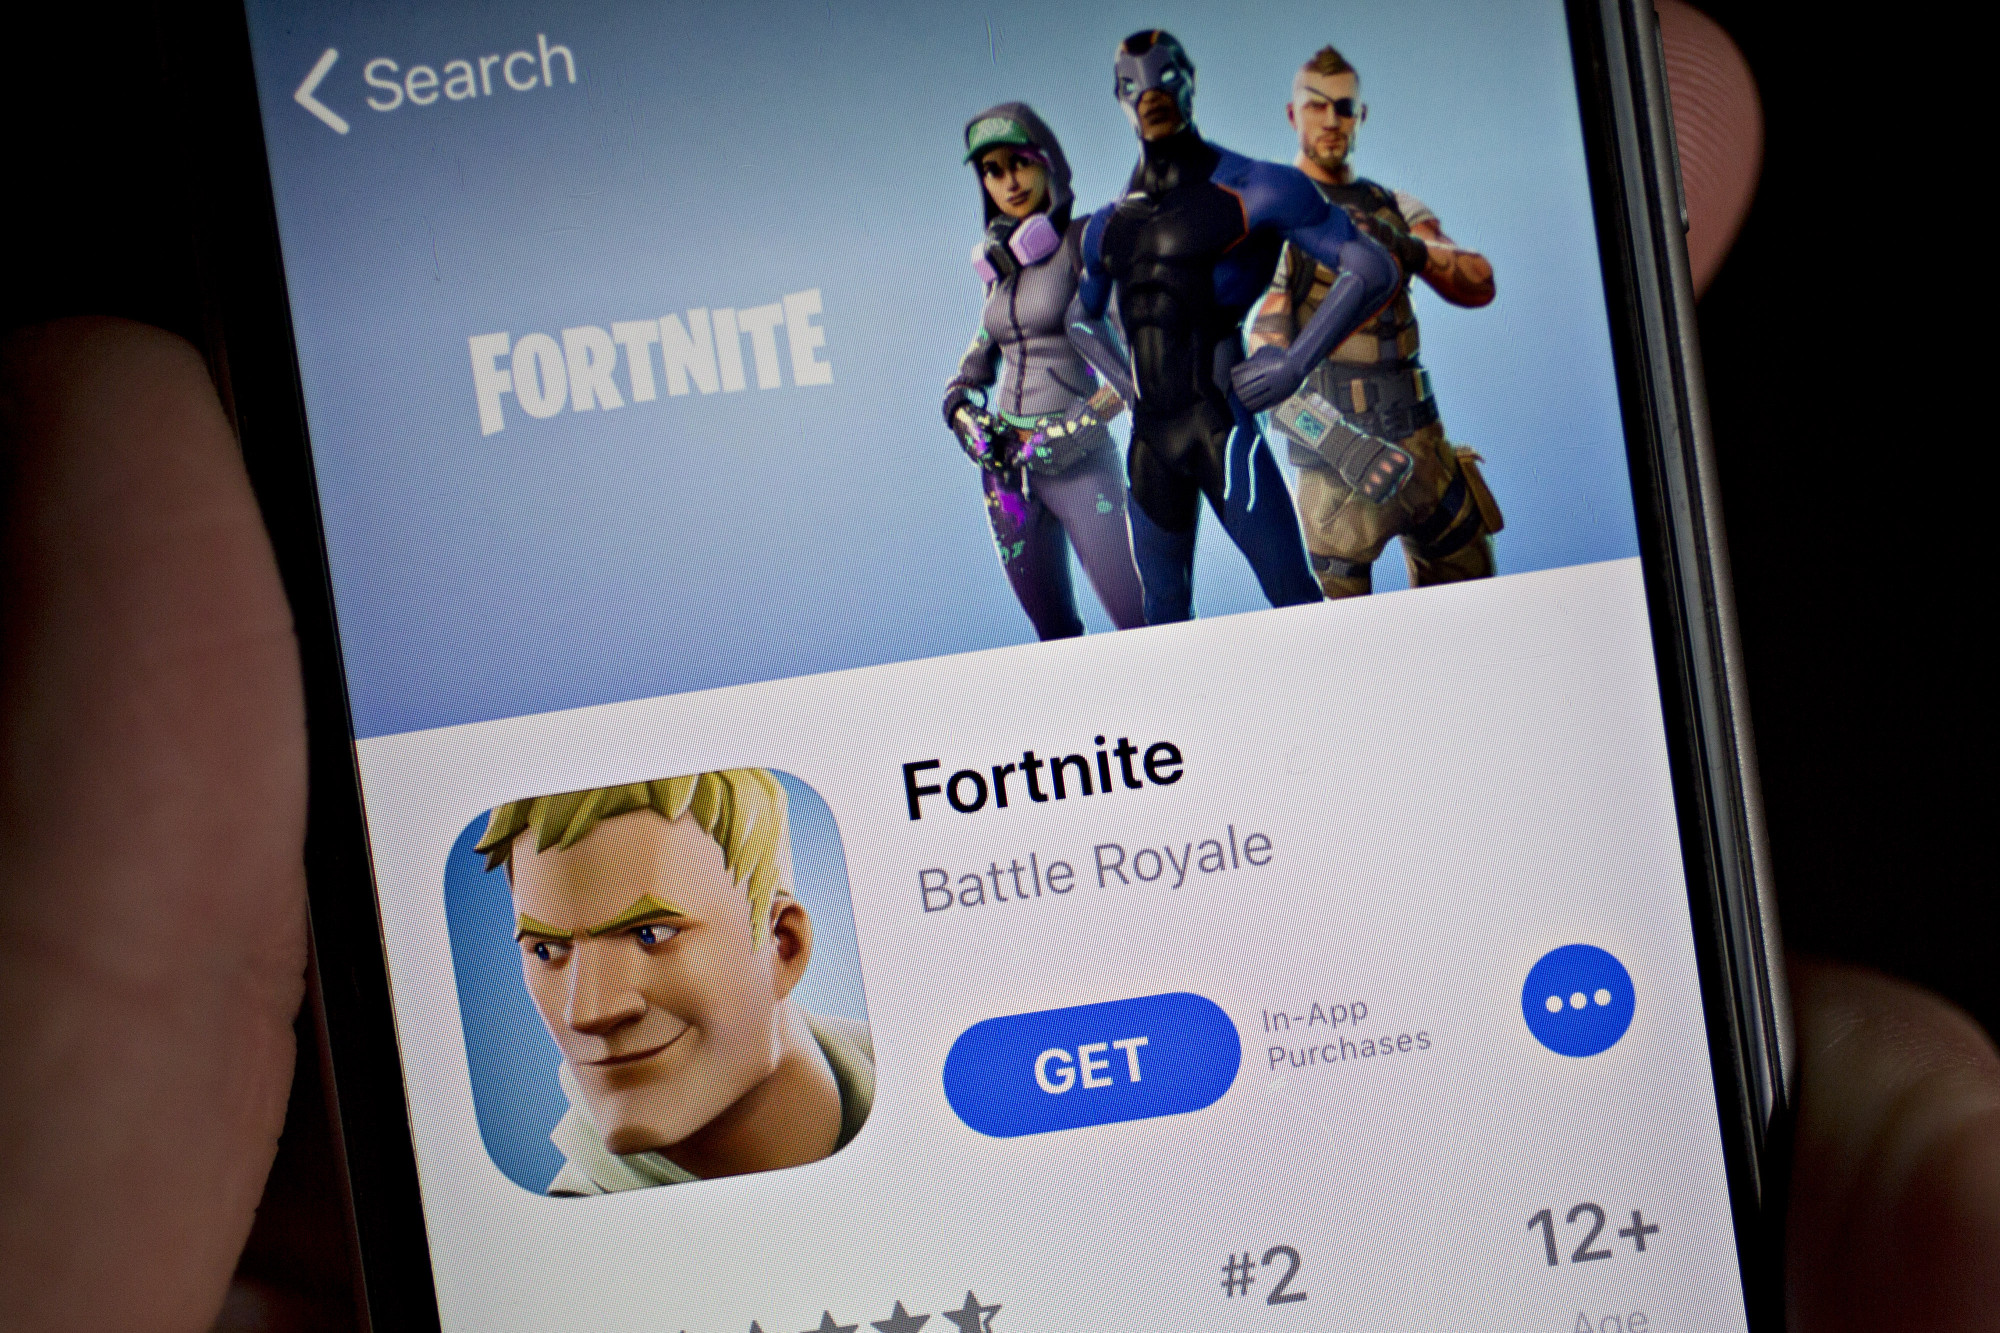 Apple S Fortnite Ban To Continue Until Legal Appeals Exhausted pl Bloomberg